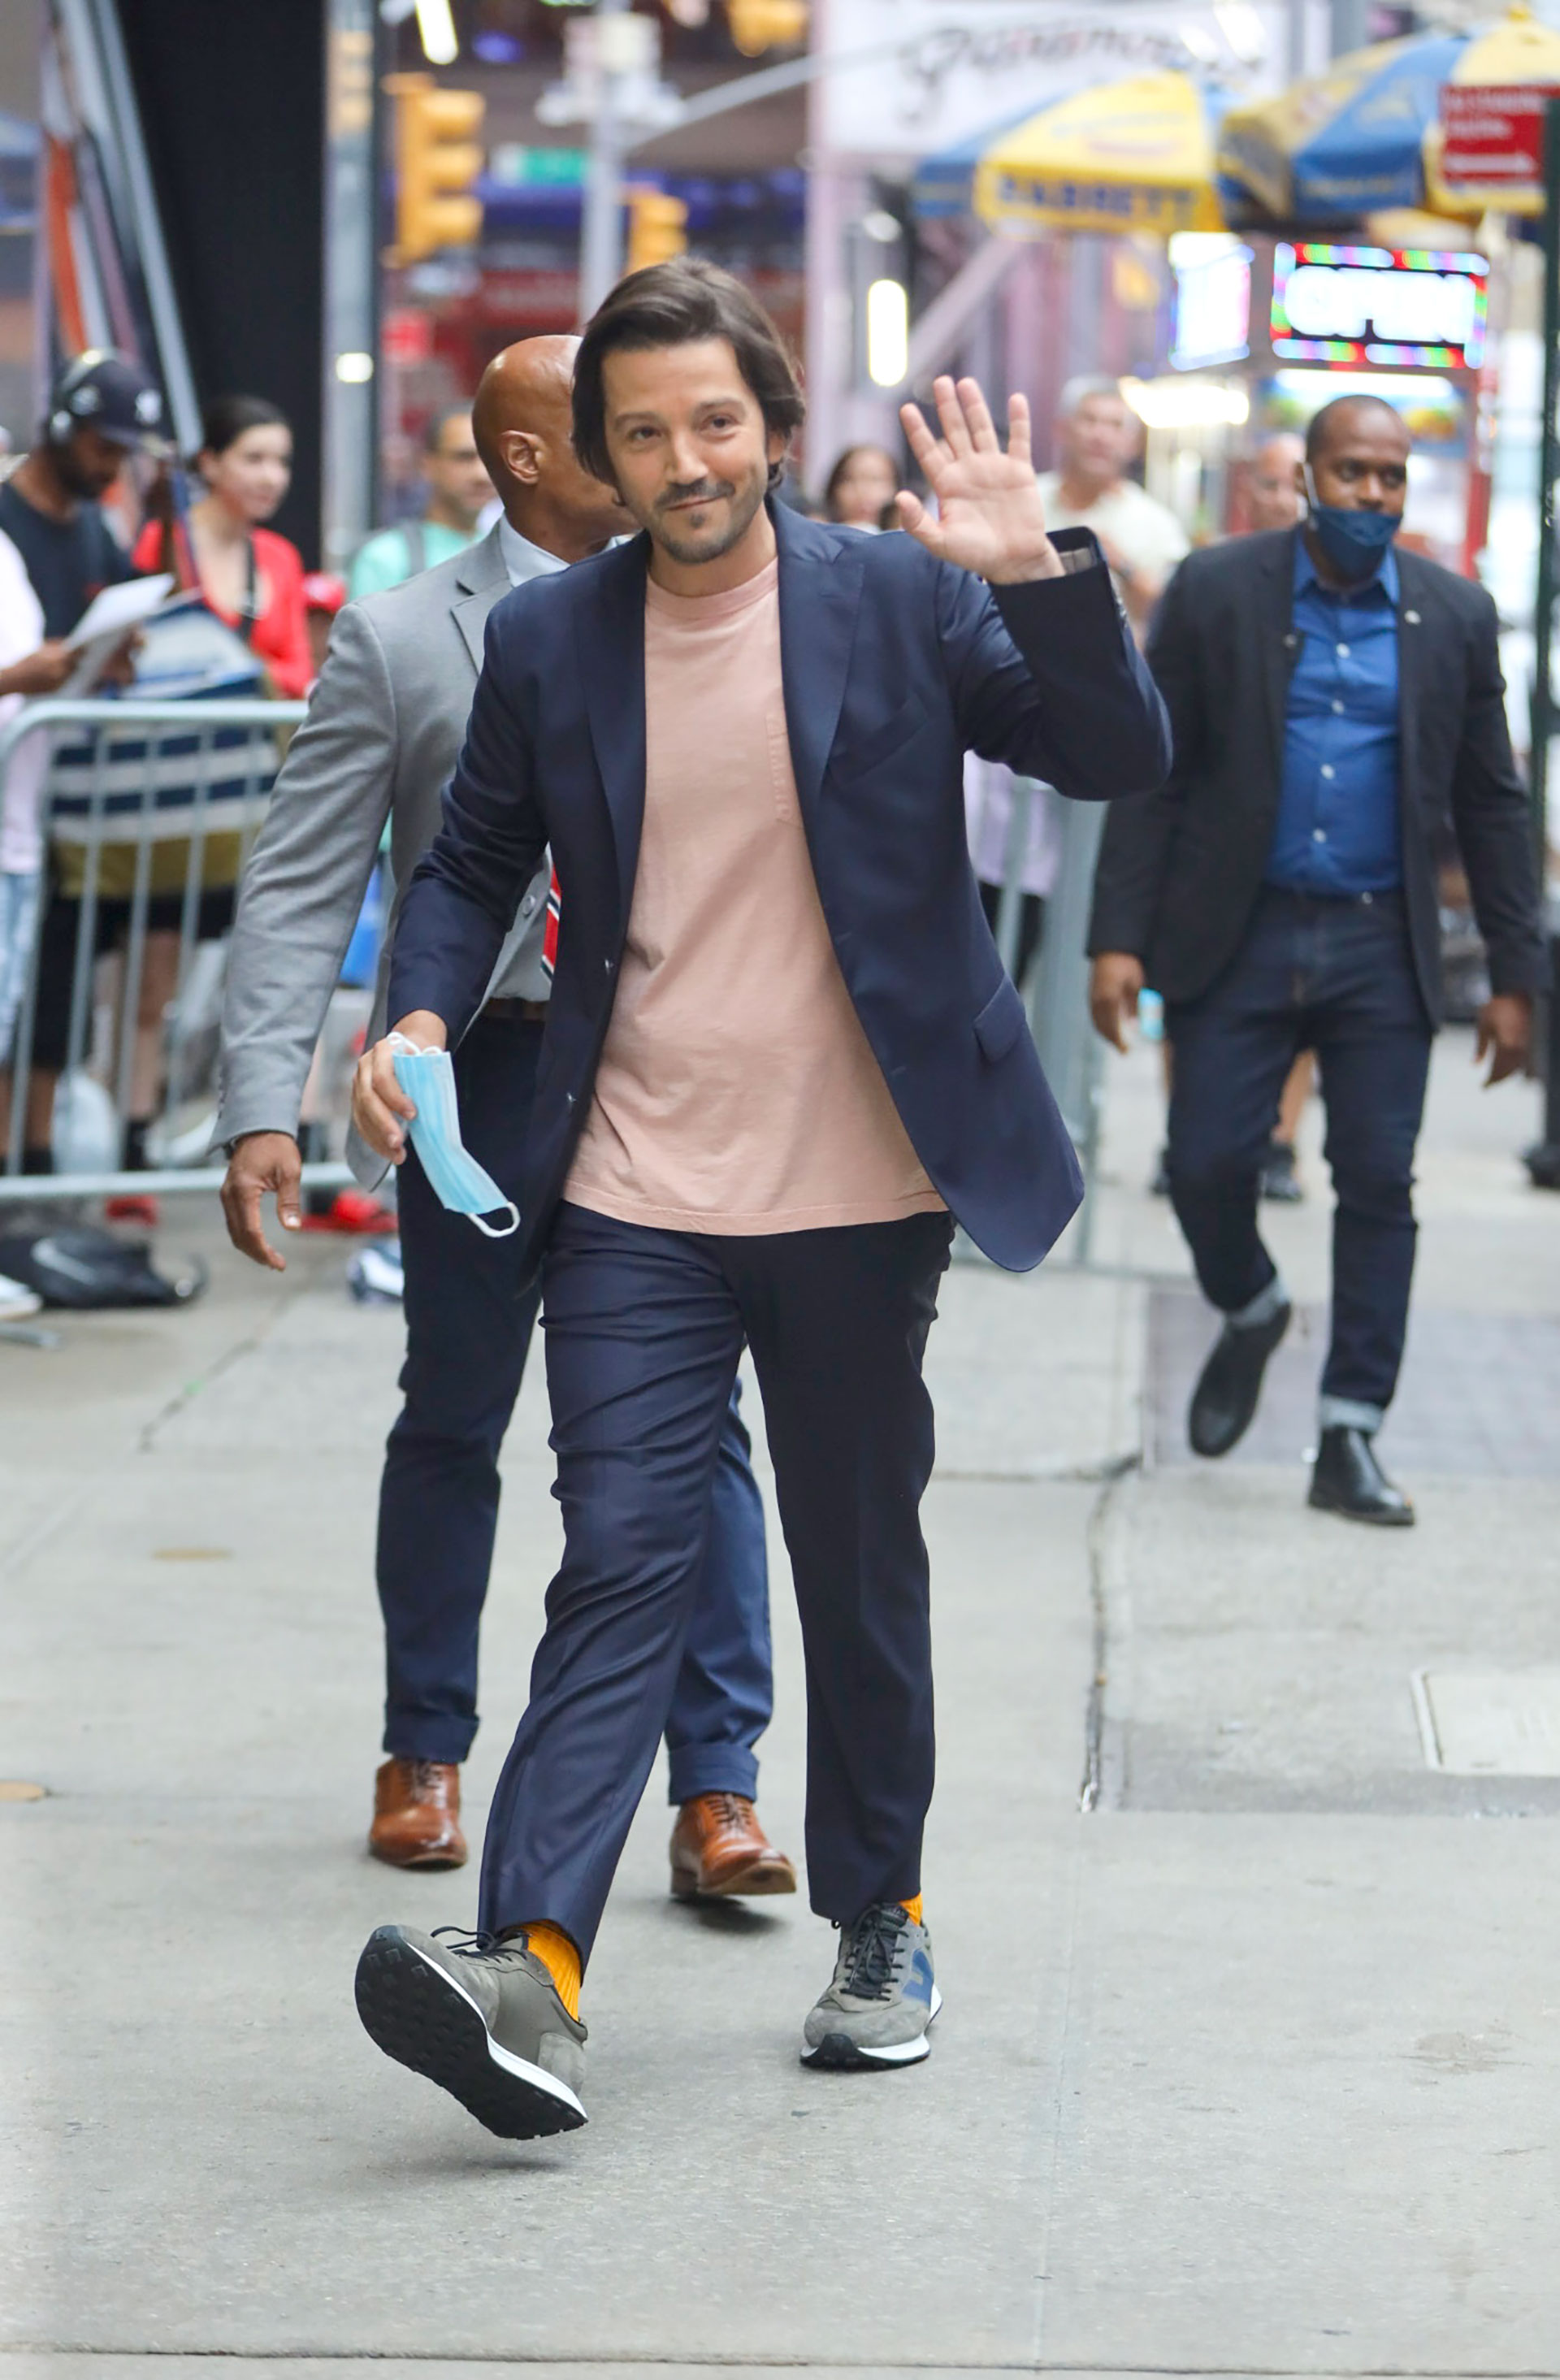 Diego Luna went to Good Morning America to talk about his new Star Wars Andor series.  Fans who recognized him walking the streets of New York greeted him from a distance